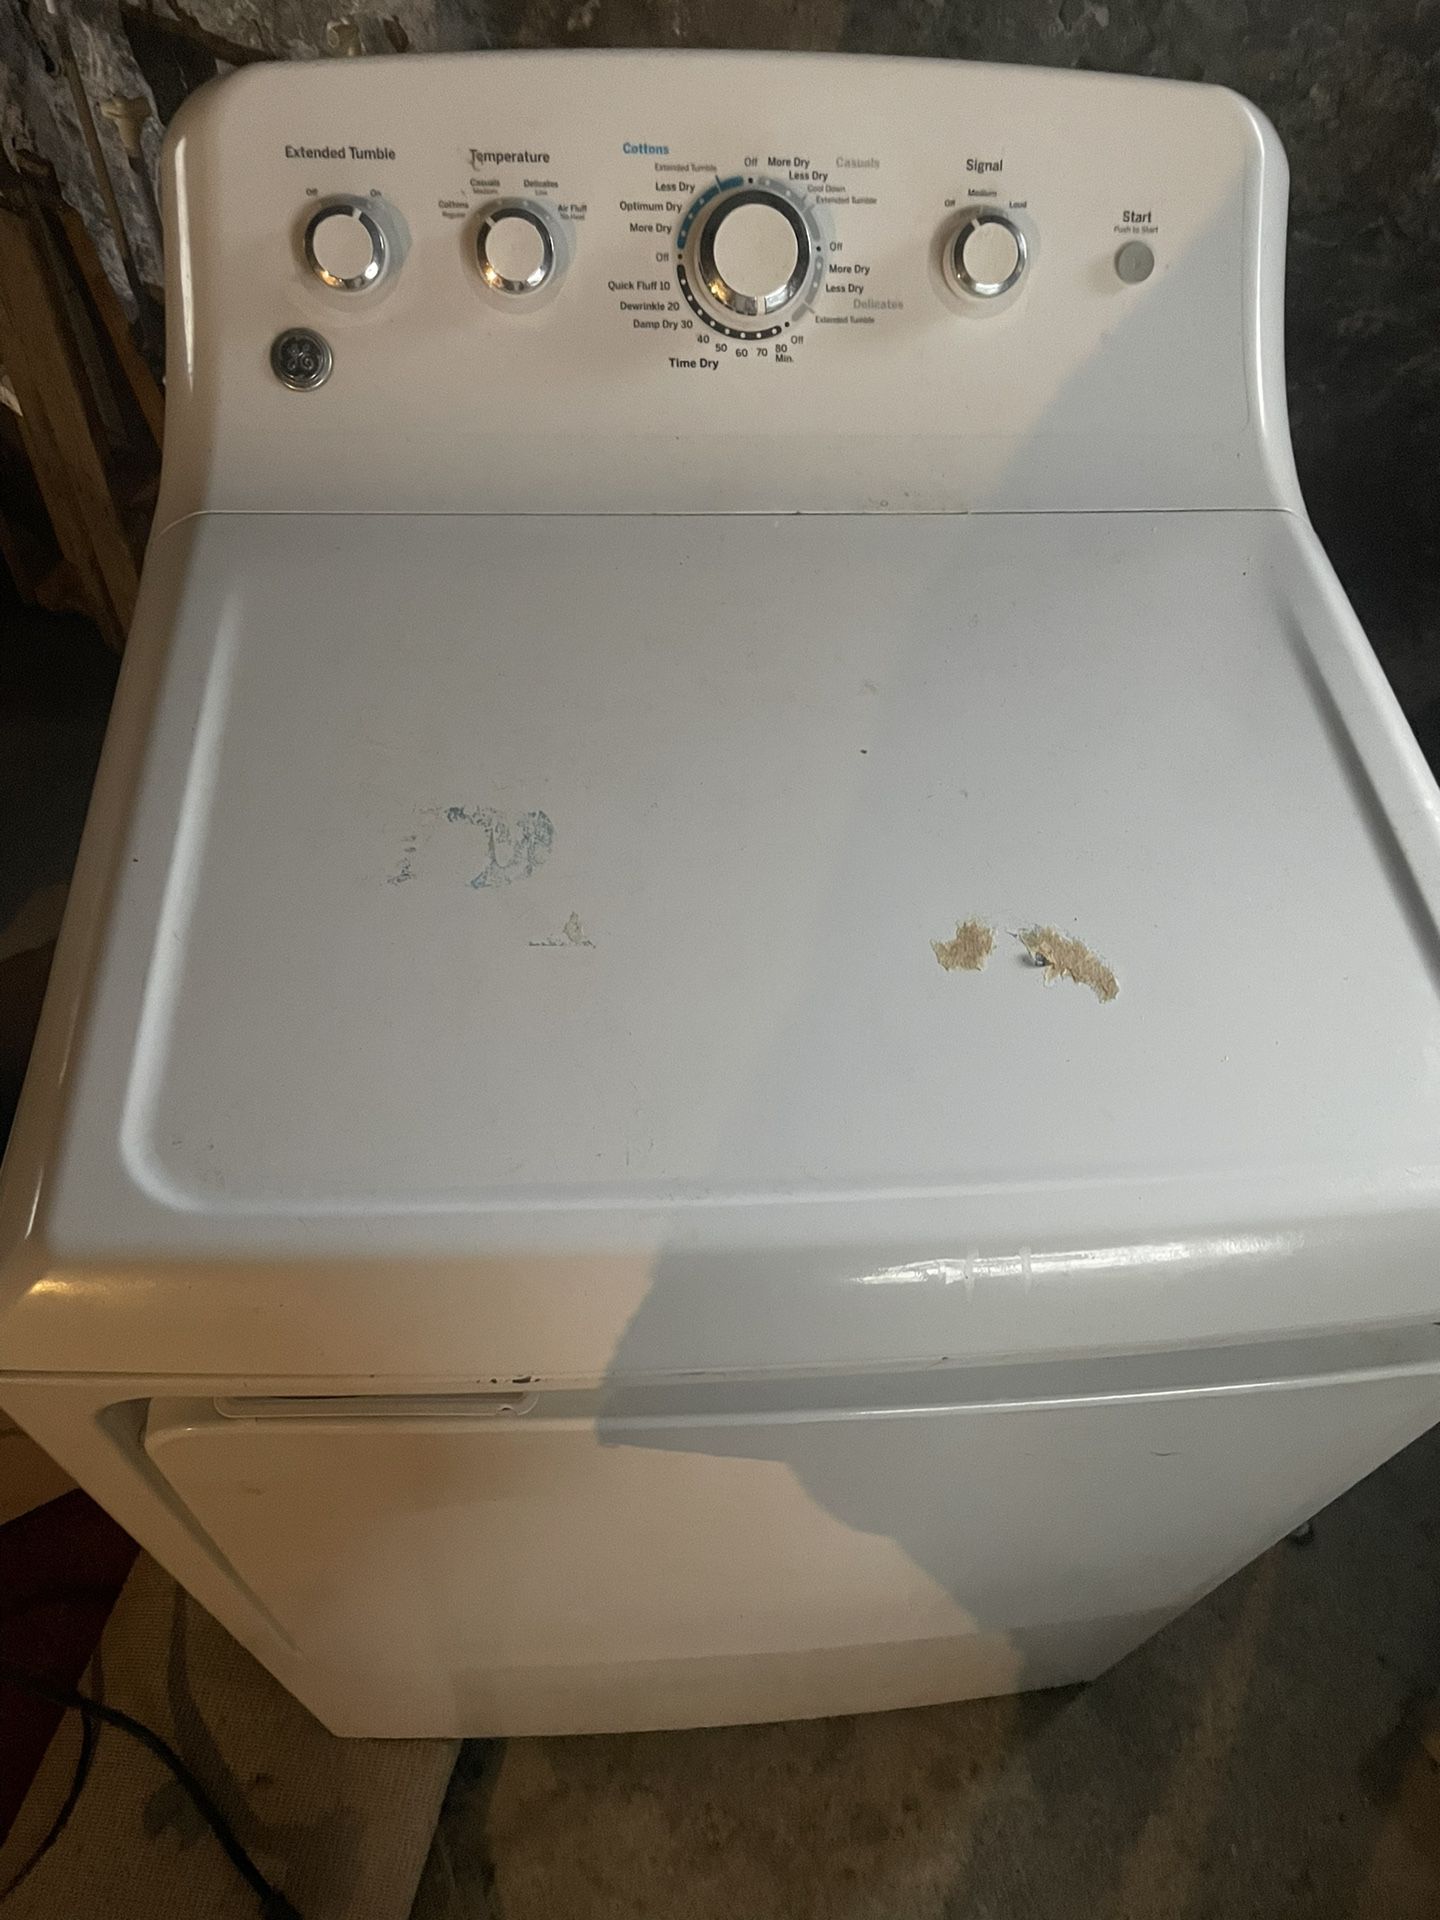 Gas Dryer (for parts) 